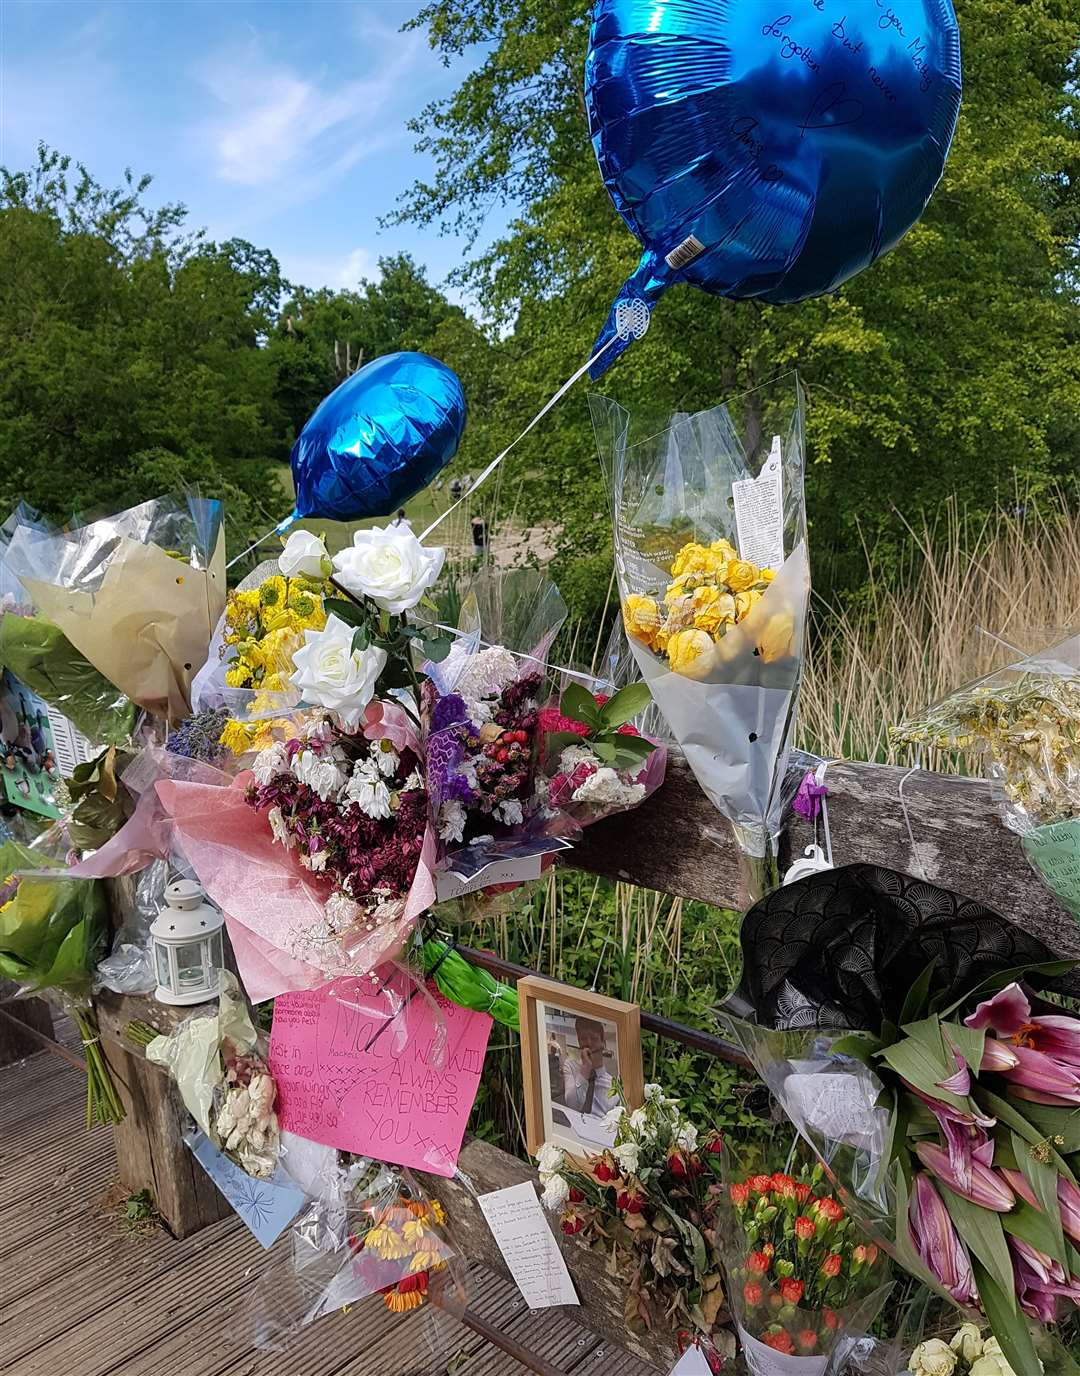 Flowers and messages were left in Dunorlan Park in Matthew's memory